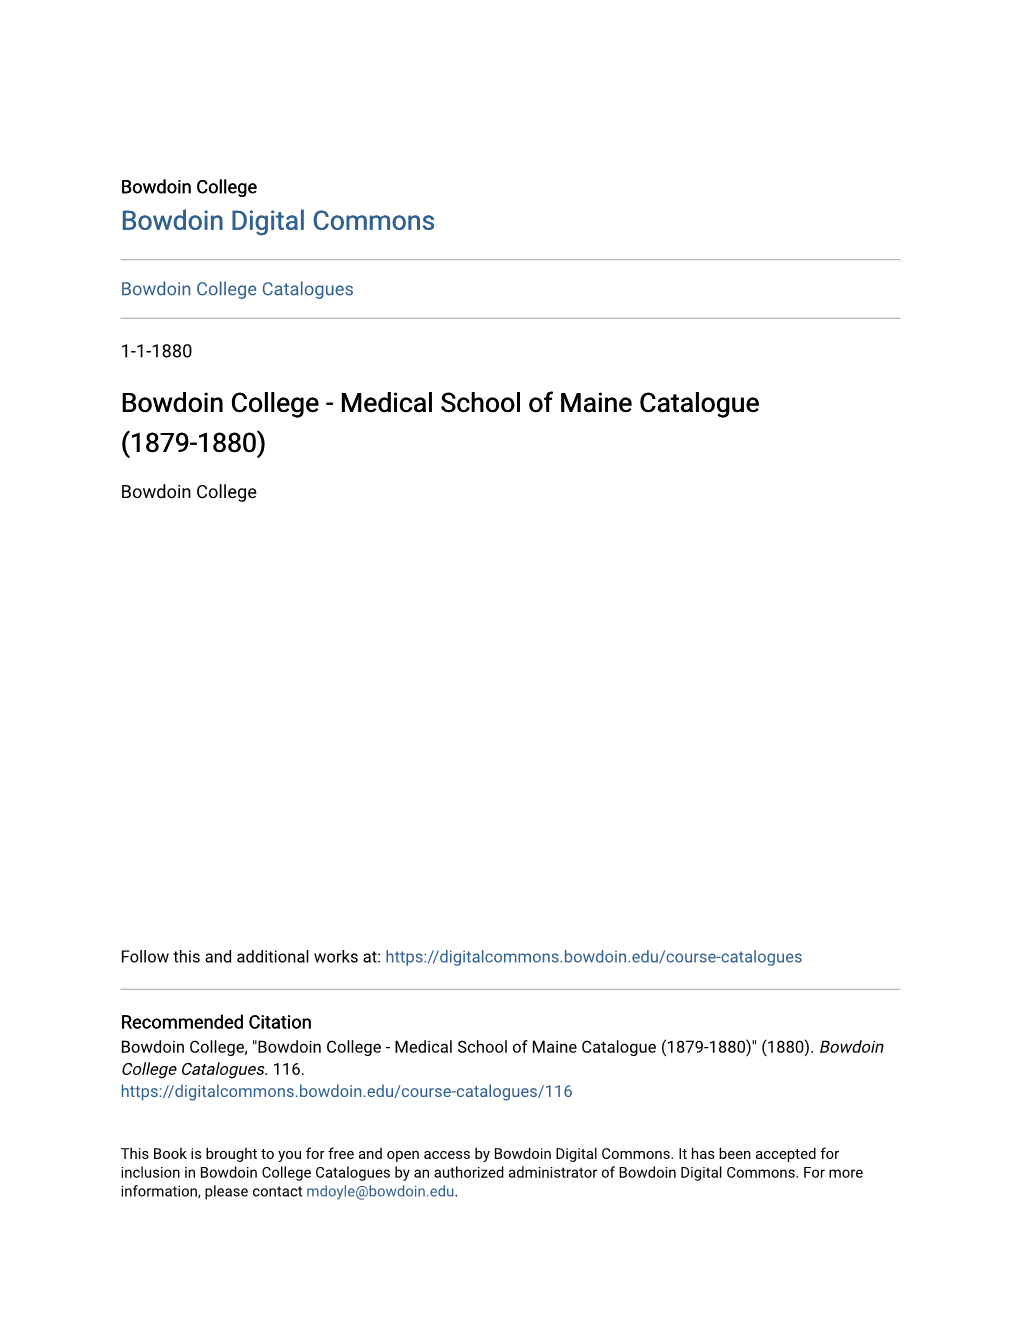 Medical School of Maine Catalogue (1879-1880)